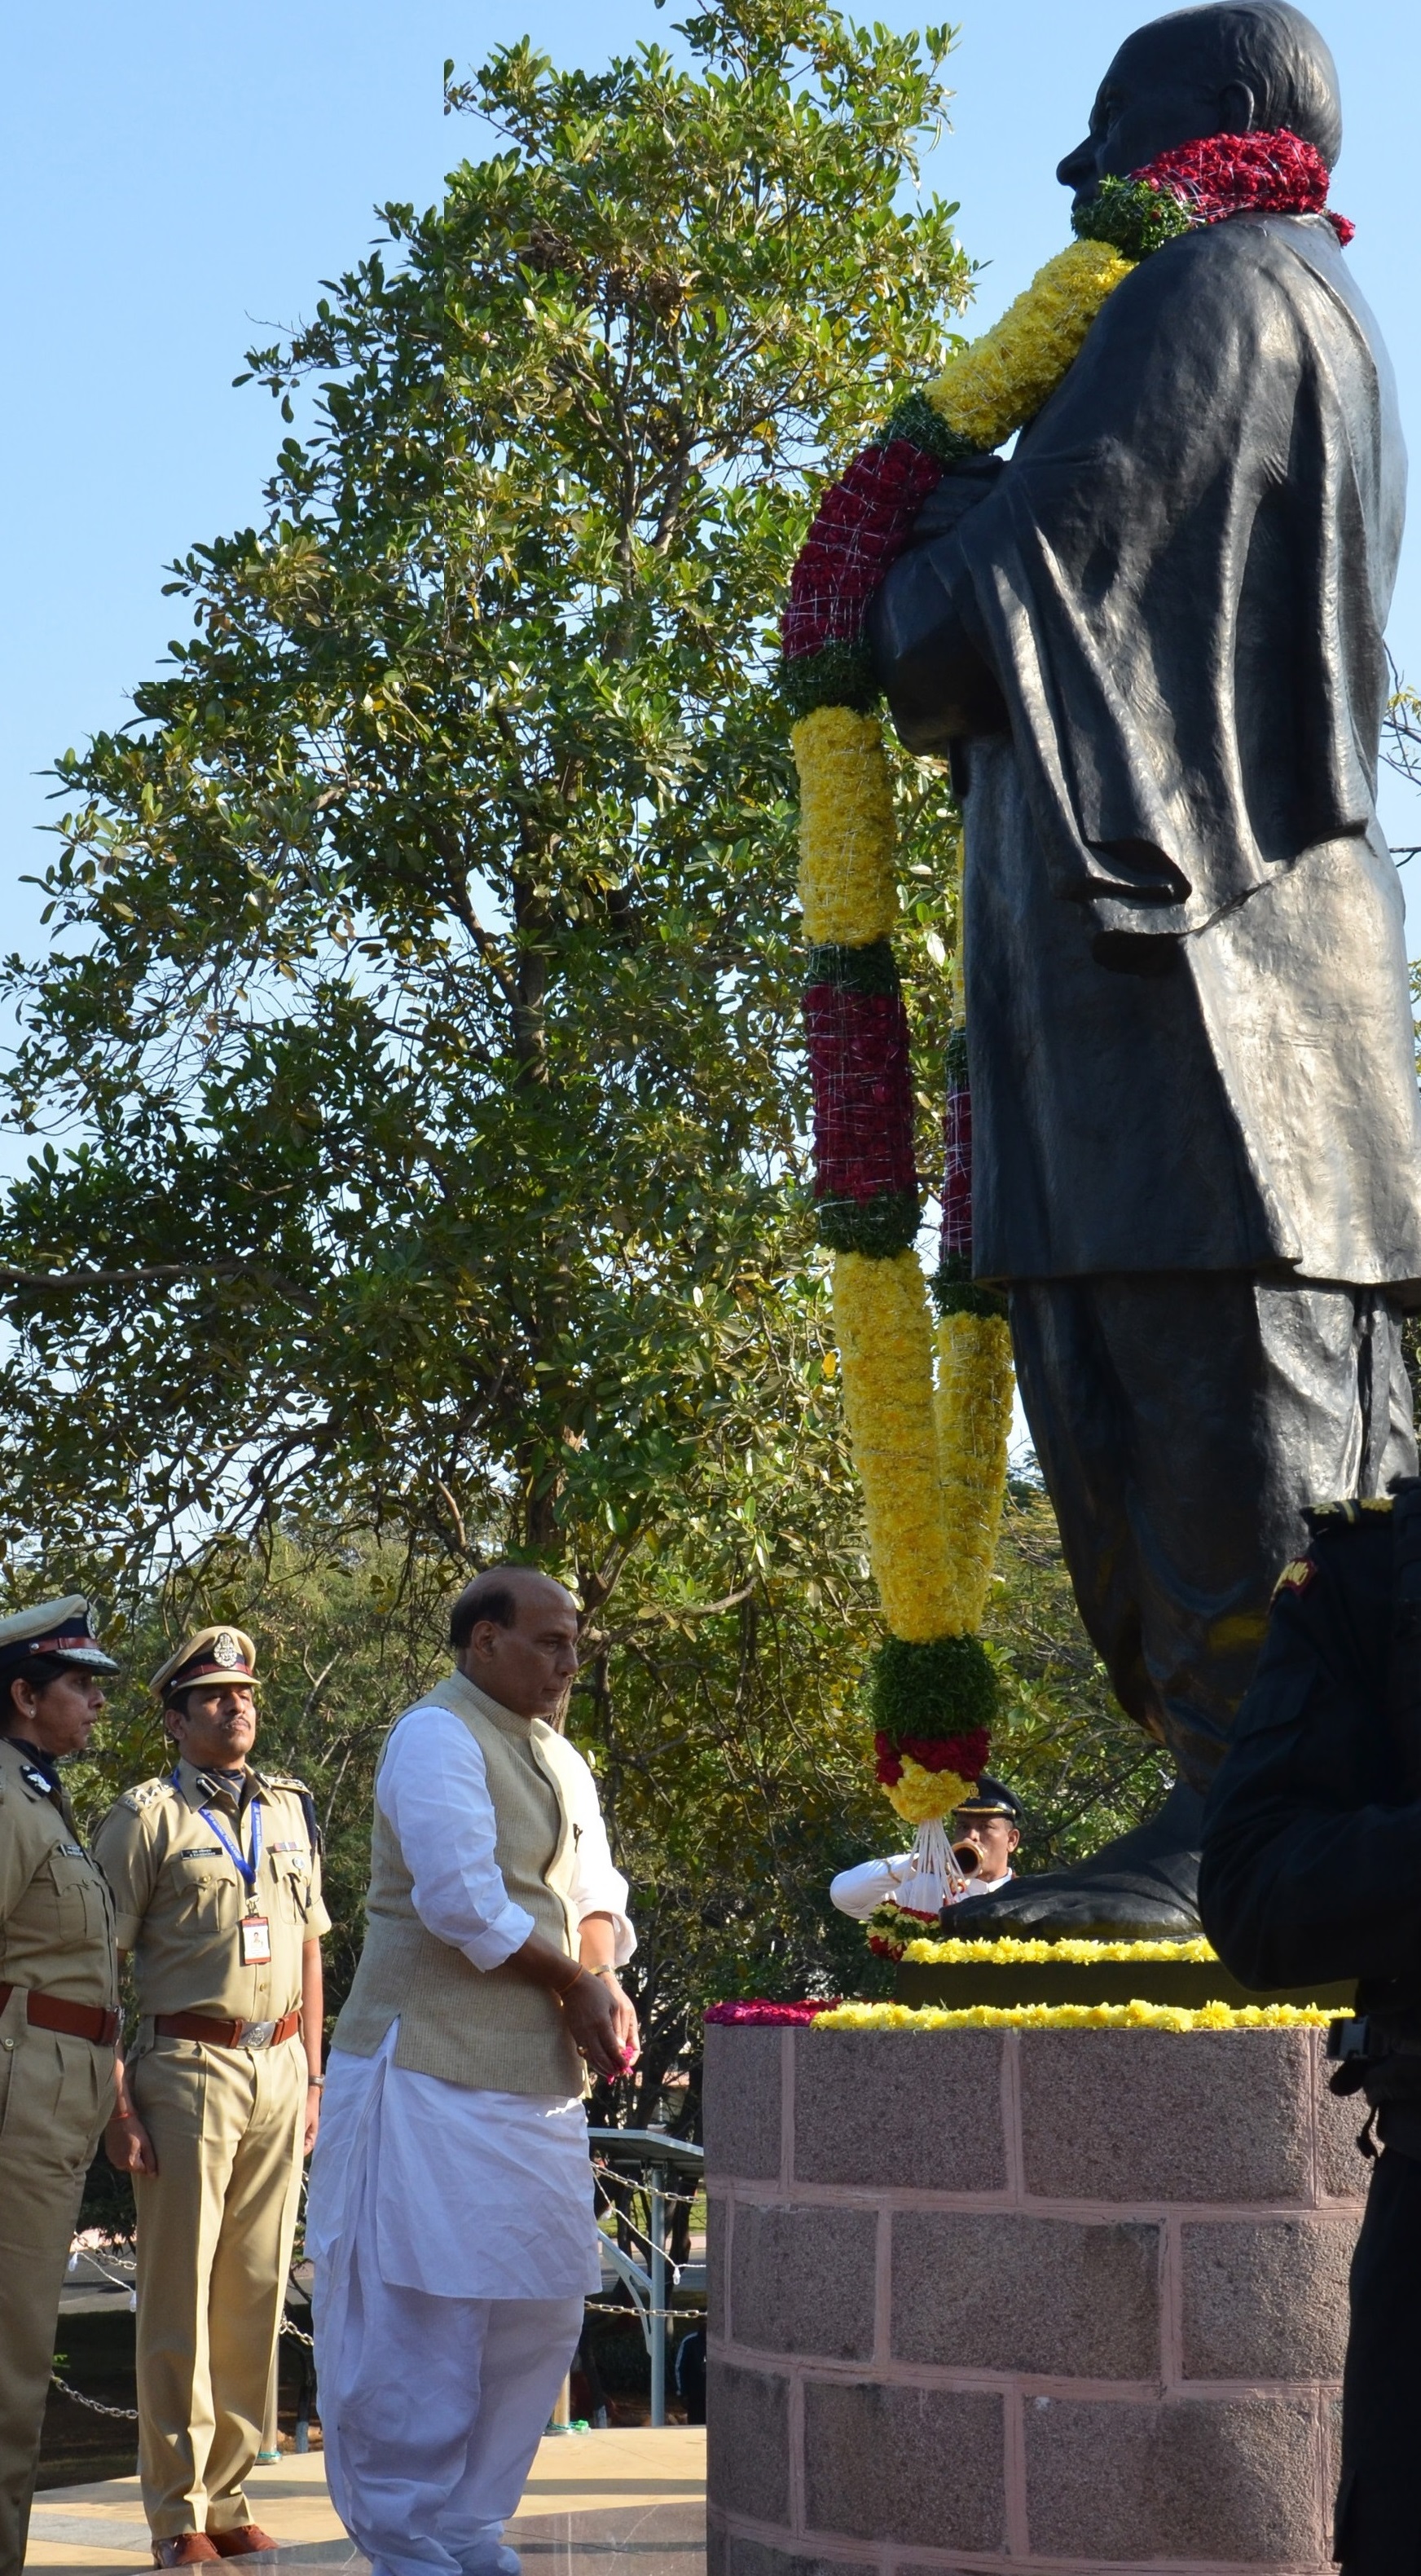 The Union Home Minister, Shri Rajnath Singh offering floral tributes to the statue of Sardar Vallabhbhai Patel at Sardar Vallabhbhai Patel National Police Academy, in Hyderabad on November 25, 2016.